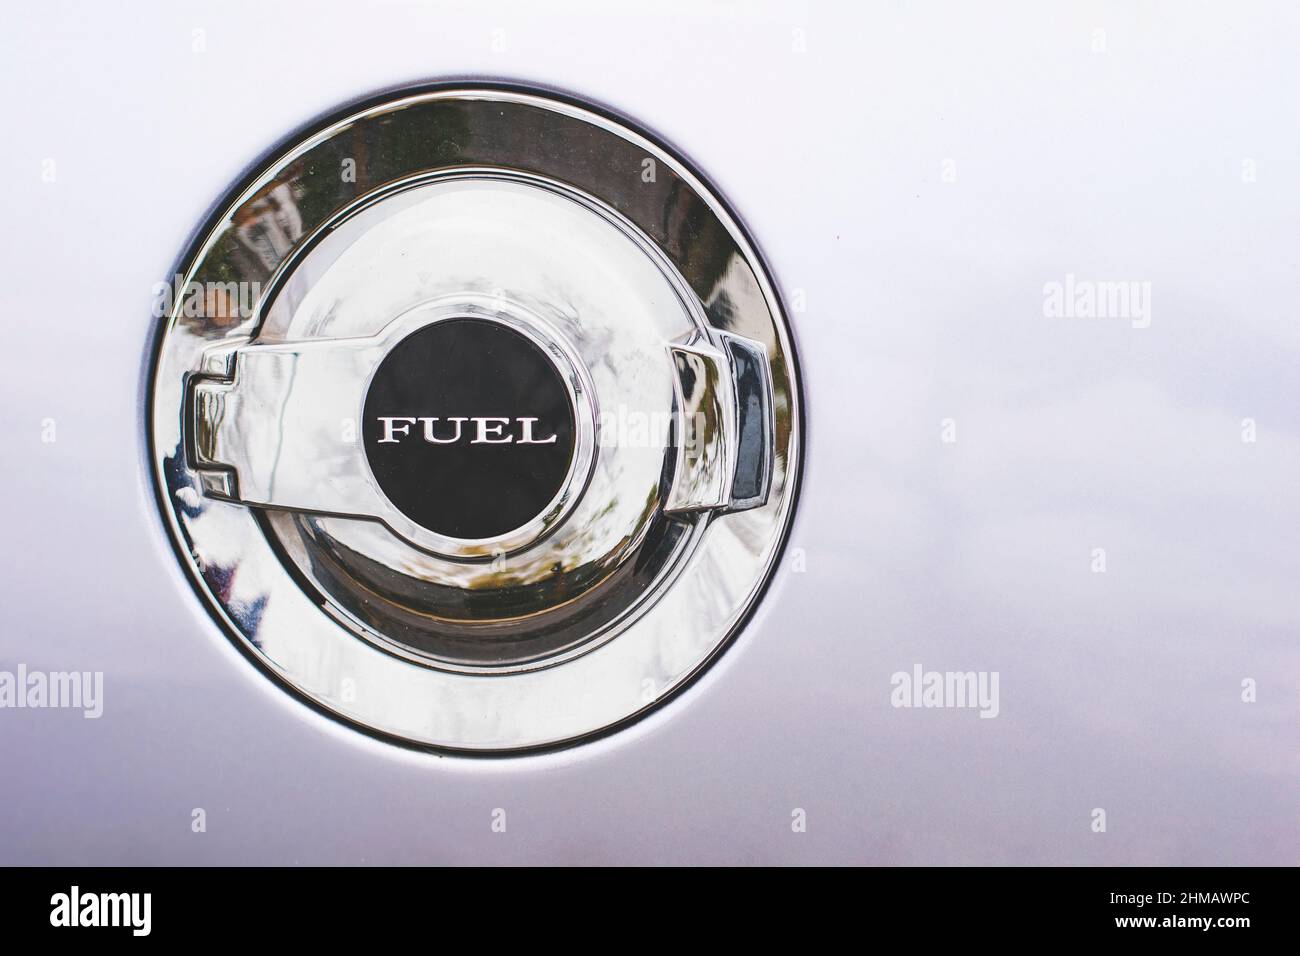 Fuel door hatch on a car close up Stock Photo